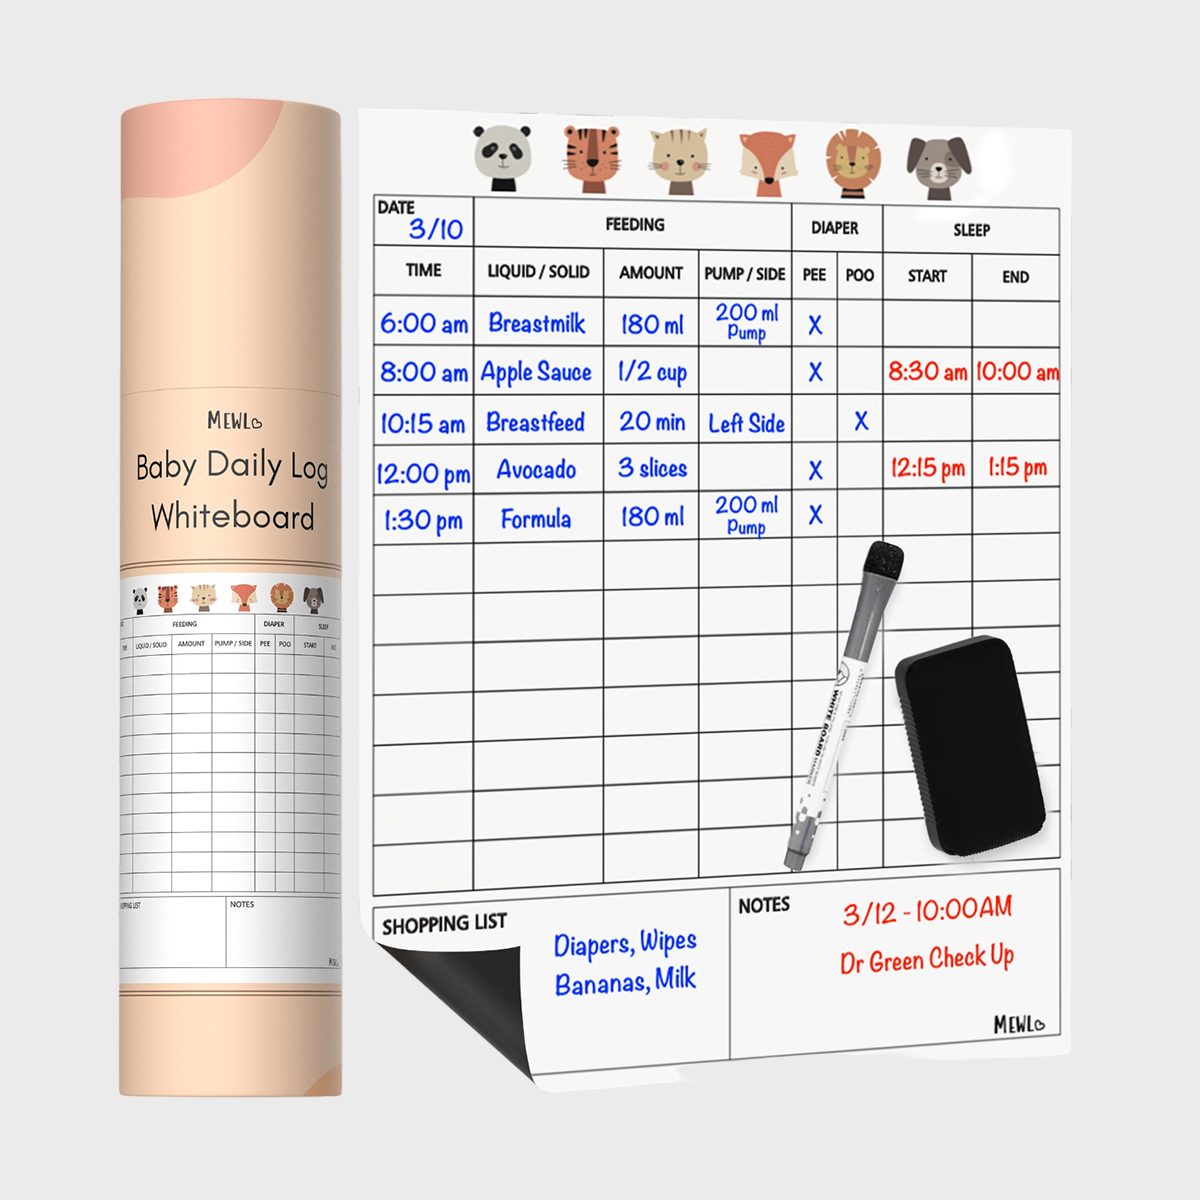 <p>Staying on top of a newborn's feedings, diaper changes and more is daunting. This genius <a href="https://www.walmart.com/ip/Mewl-Baby-and-Nursing-Chart-Daily-Schedule-Tracker-11-x-14-Dry-Erase-Magnetic-Whiteboard/482914499" rel="nofollow noopener noreferrer">Mewl dry-erase schedule tracker</a> helps parents and caregivers work together in organized and coordinated shifts. It also allows babies with sensitive needs and health issues to have neat, easy-to-read daily records in chart form. It's one of the best baby gifts for a baby who has had NICU time and a sanity saver for all exhausted parents.</p> <p class="listicle-page__cta-button-shop"><a class="shop-btn" href="https://www.walmart.com/ip/Mewl-Baby-and-Nursing-Chart-Daily-Schedule-Tracker-11-x-14-Dry-Erase-Magnetic-Whiteboard/482914499">Shop Now</a></p>